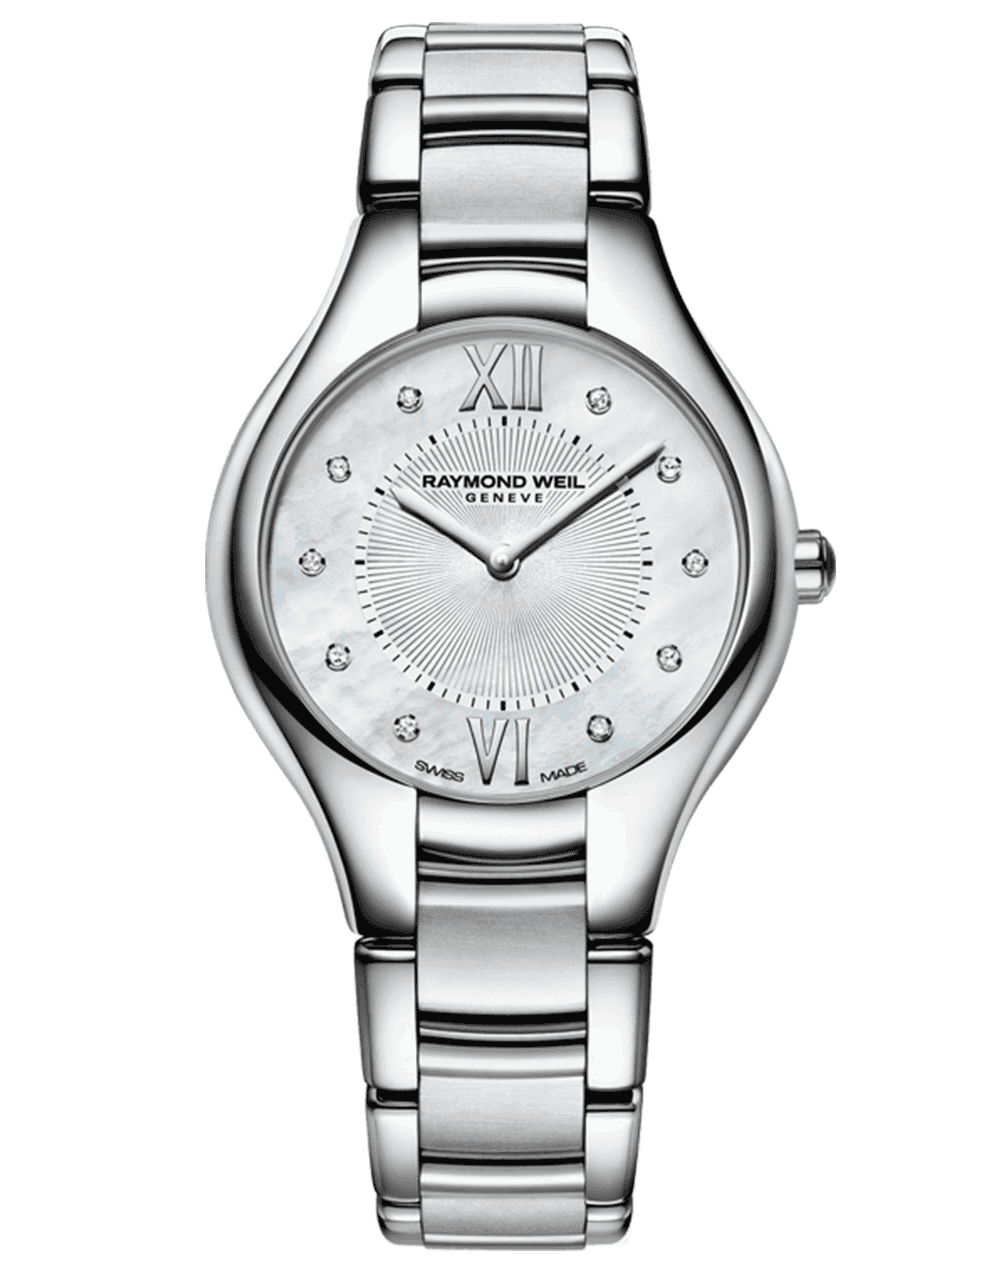 Christopher Ward Replicas Watches